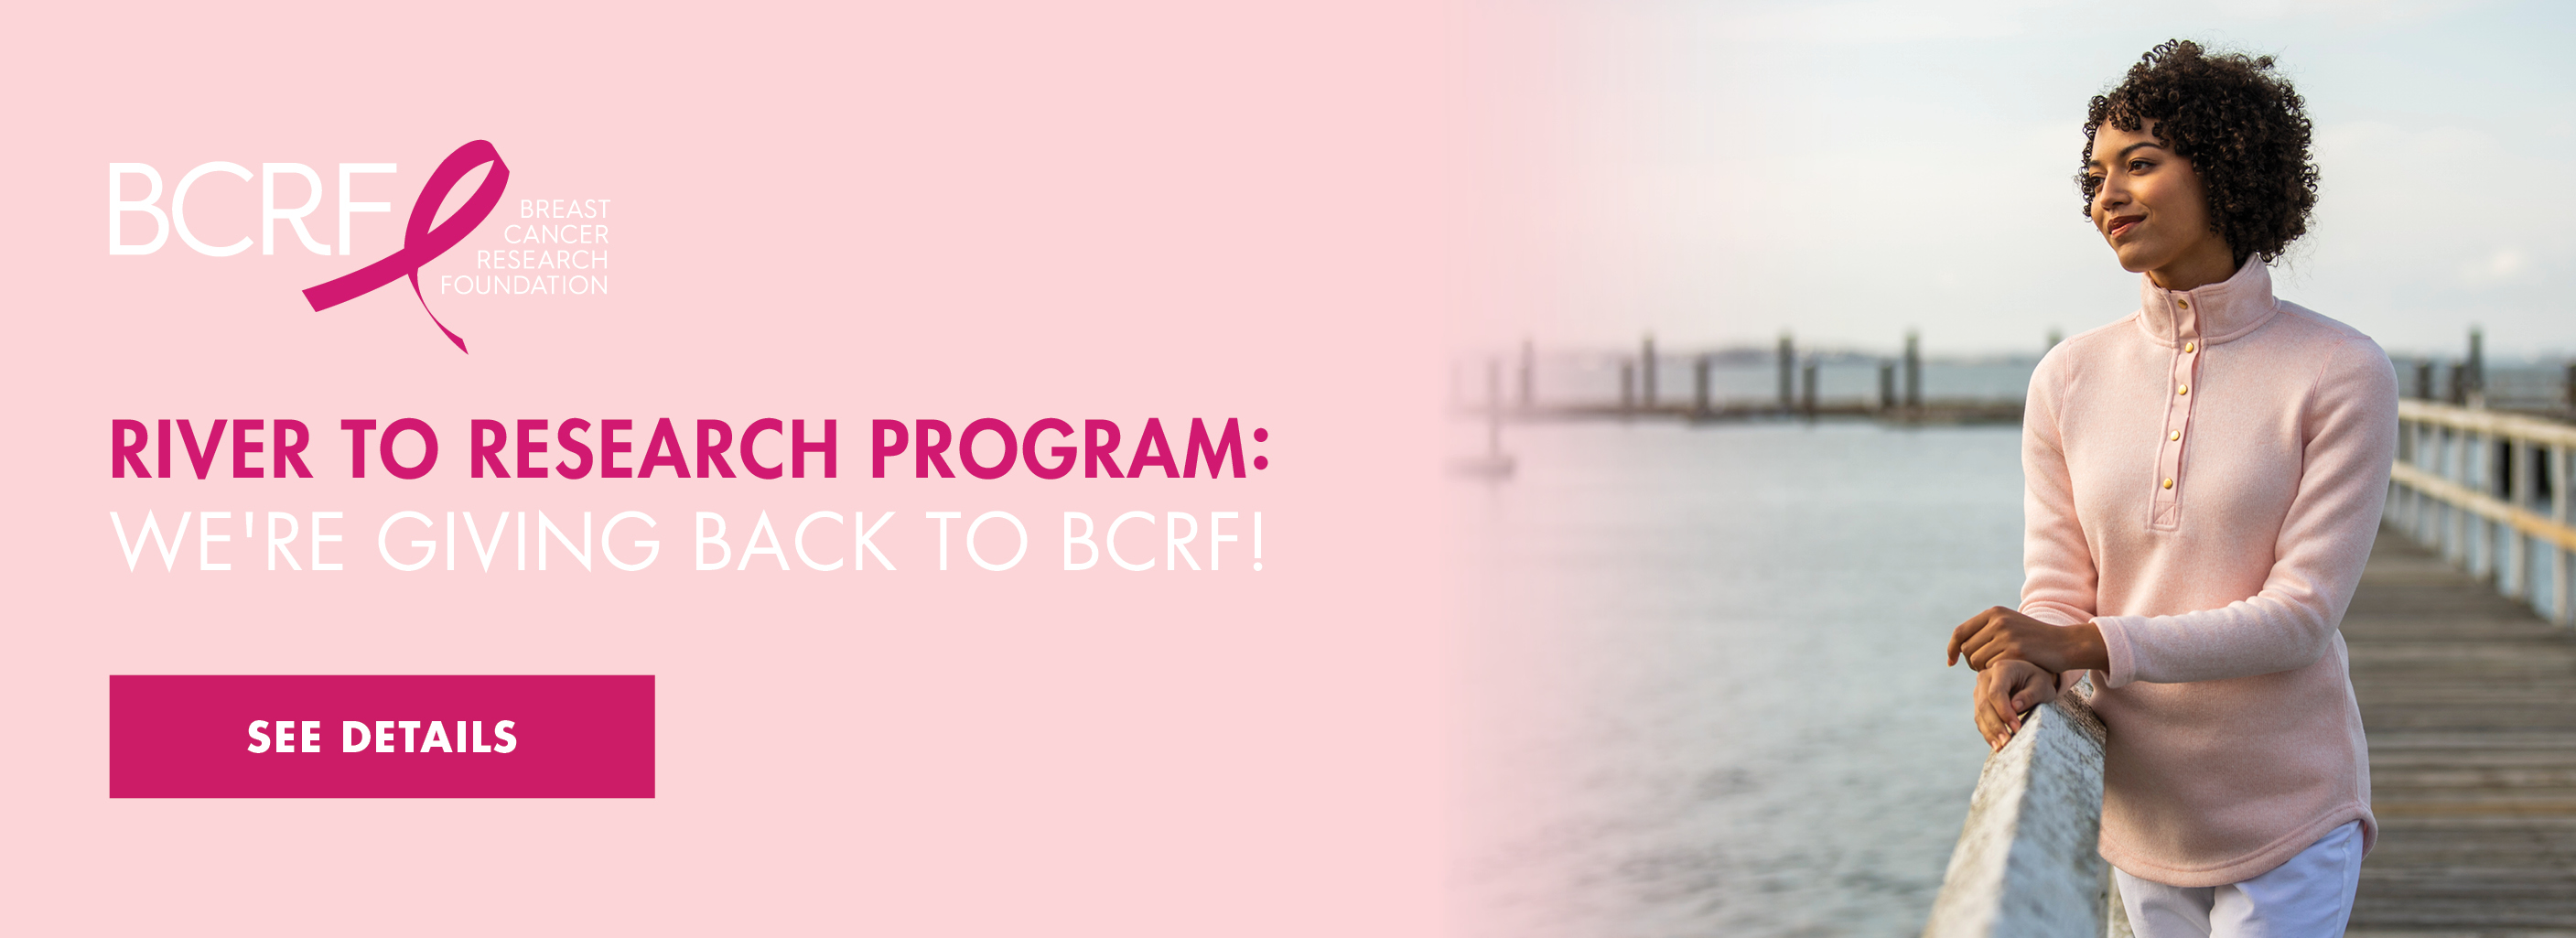 River To Research Program - We're Giving Back to BCRF